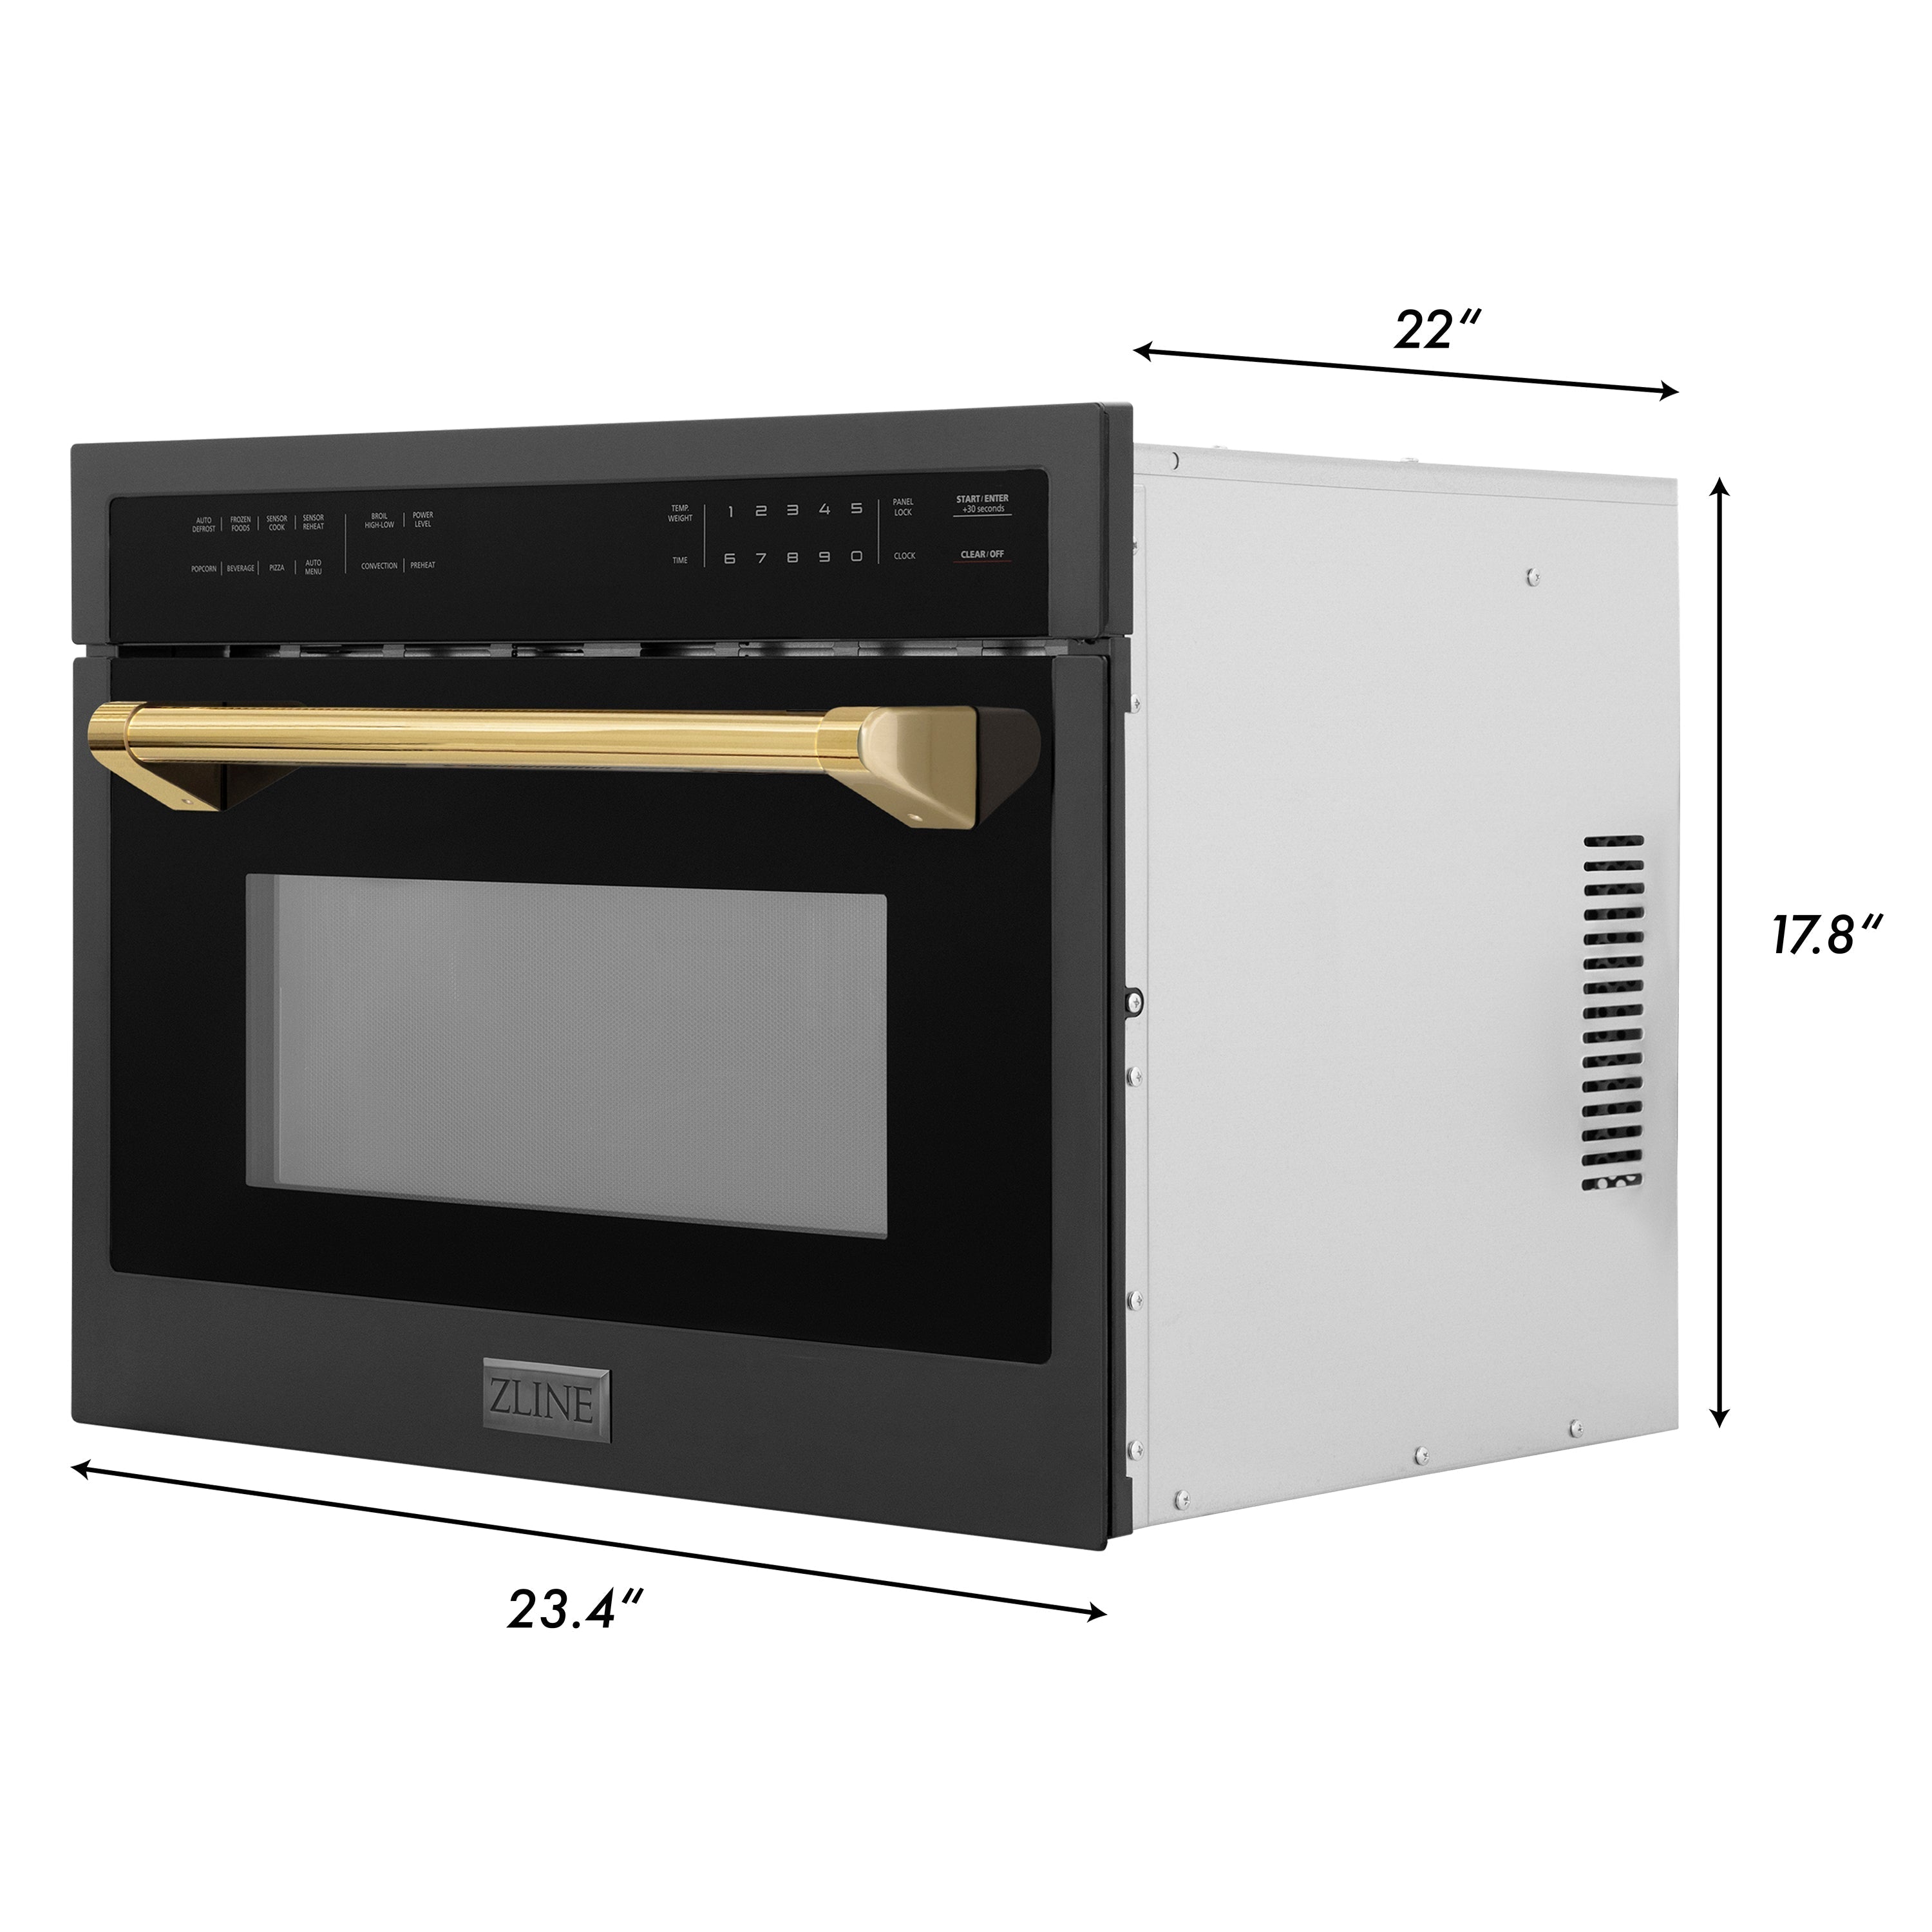 ZLINE Autograph Edition 24" 1.6 cu ft. Built-in Convection Microwave Oven in Black Stainless Steel and Gold Accents (MWOZ-24-BS-G) - New Star Living